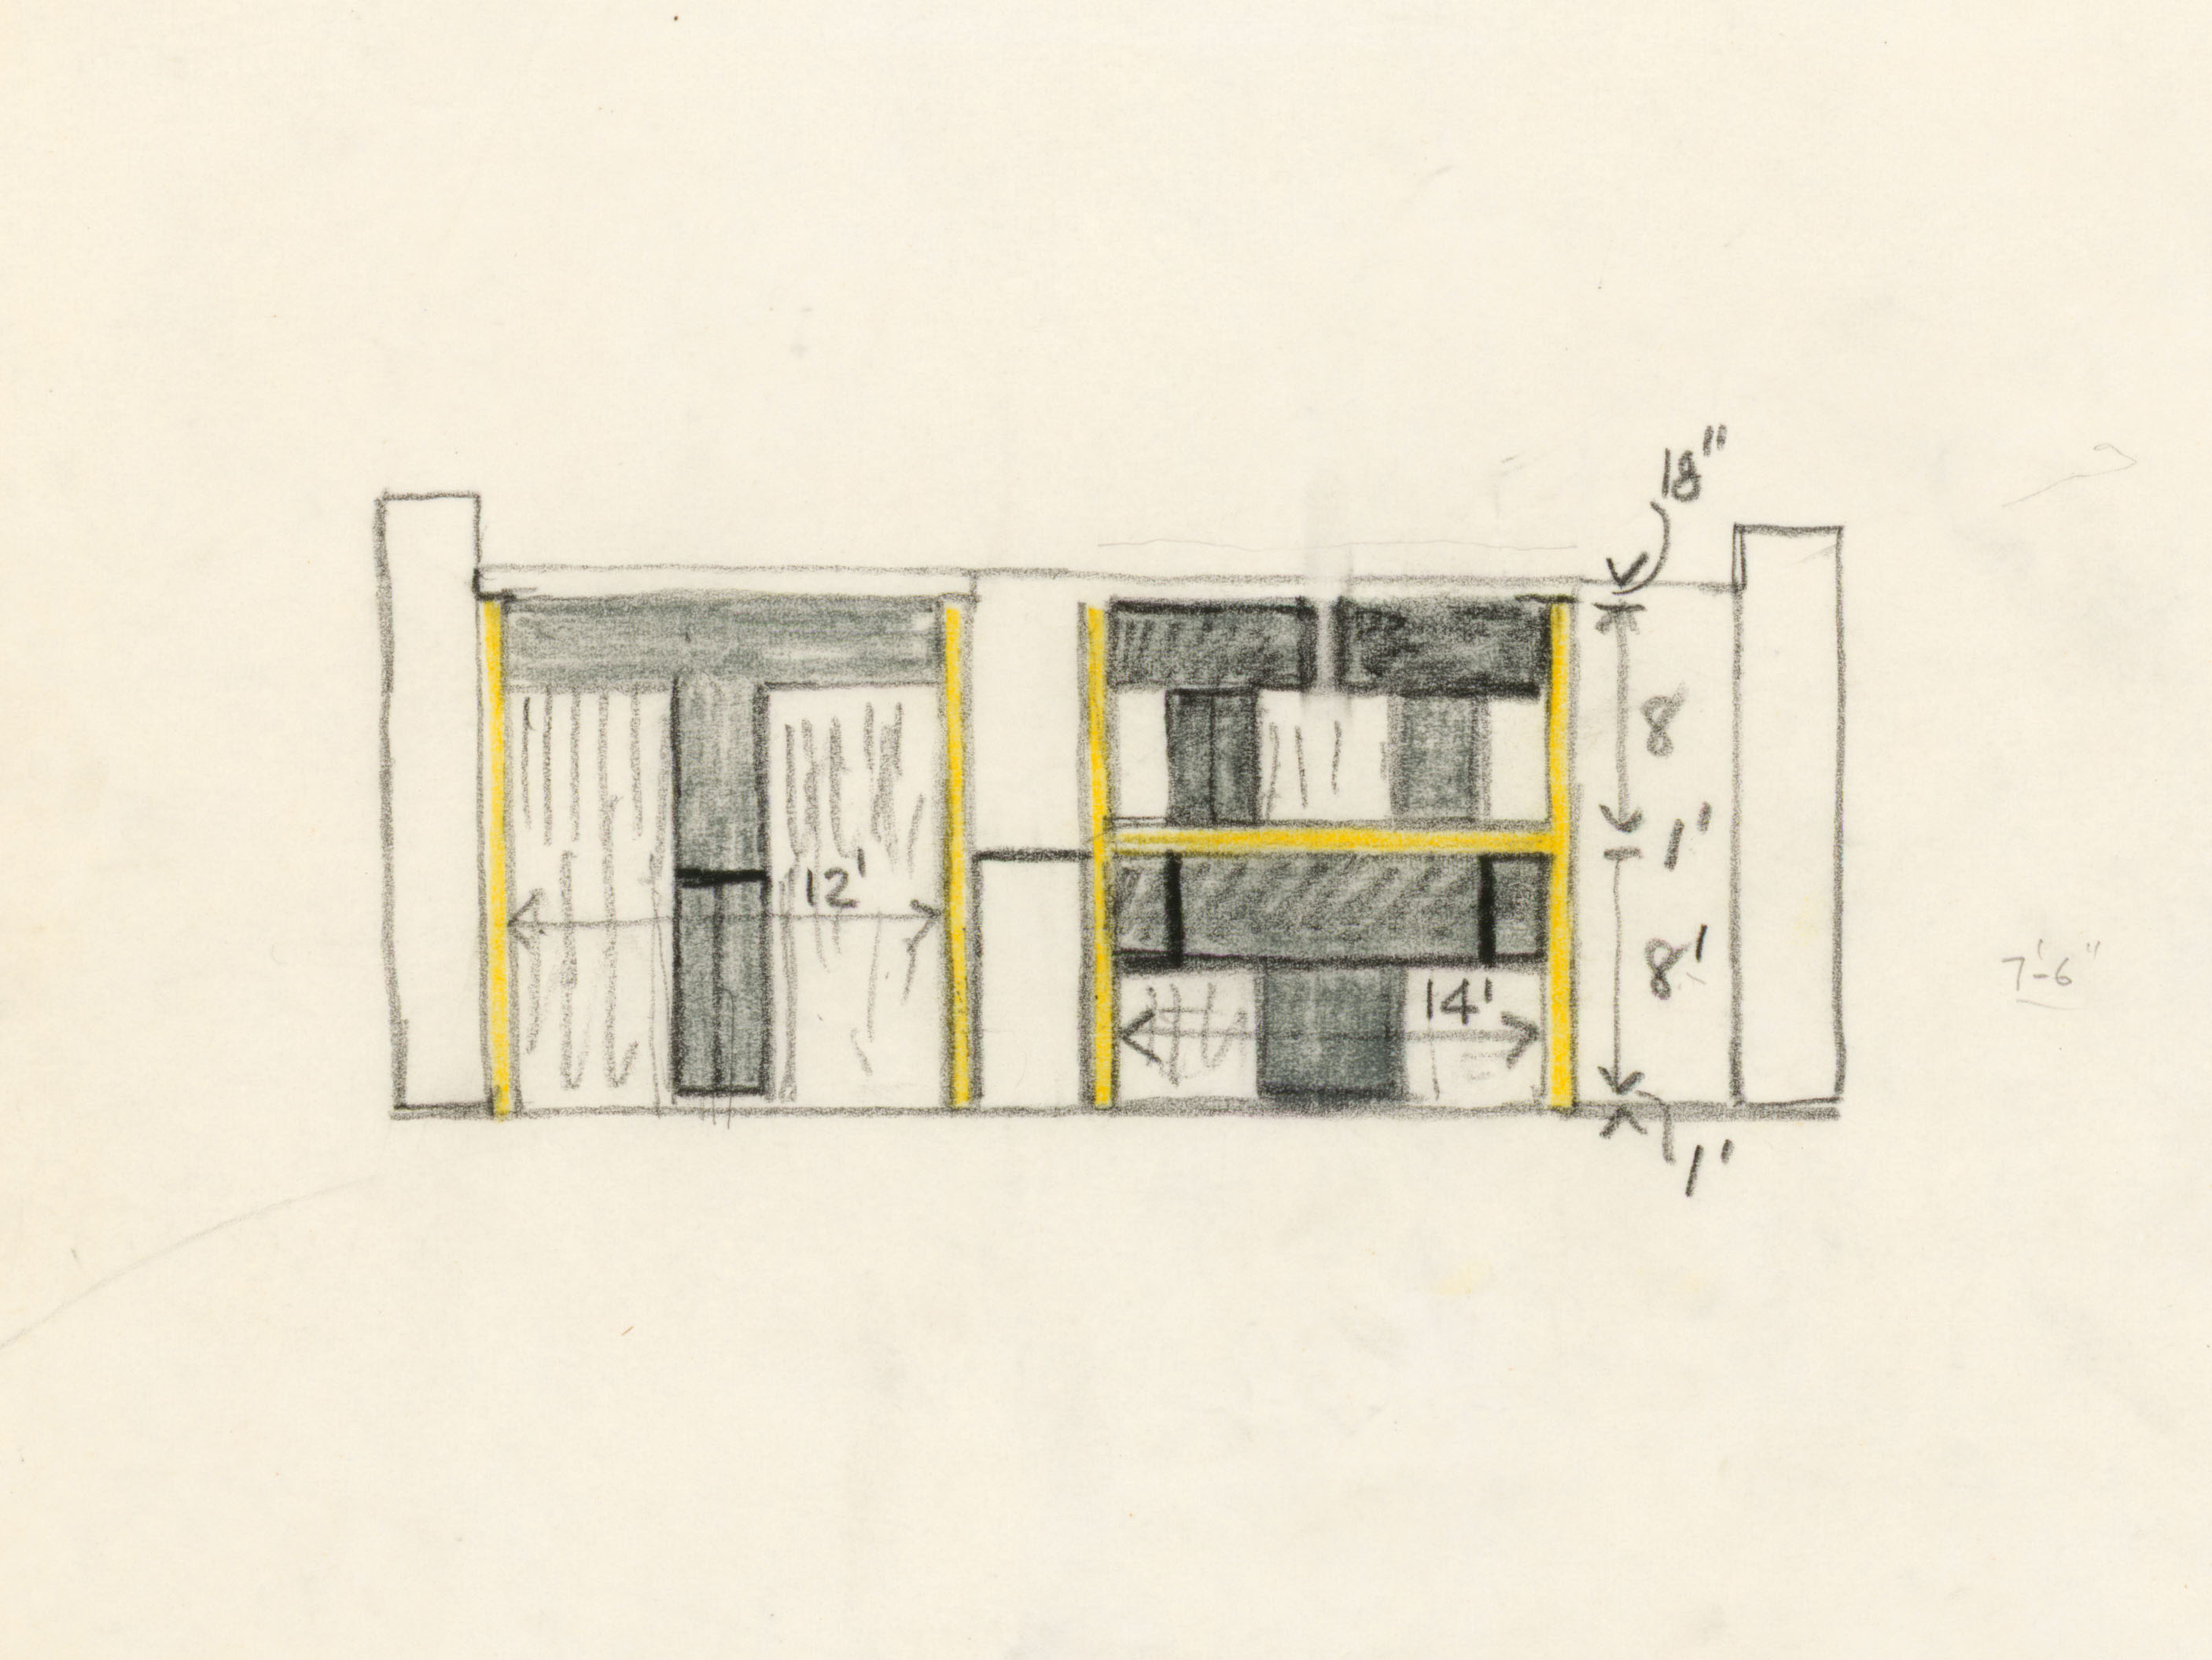 Kahn's Sketch of the Esherick House in Chestnut Hill. Courtesy of Louis I. Kahn Collection, University of Pennsylvania and the Pennsylvania Historical and Museum Commission.​ 